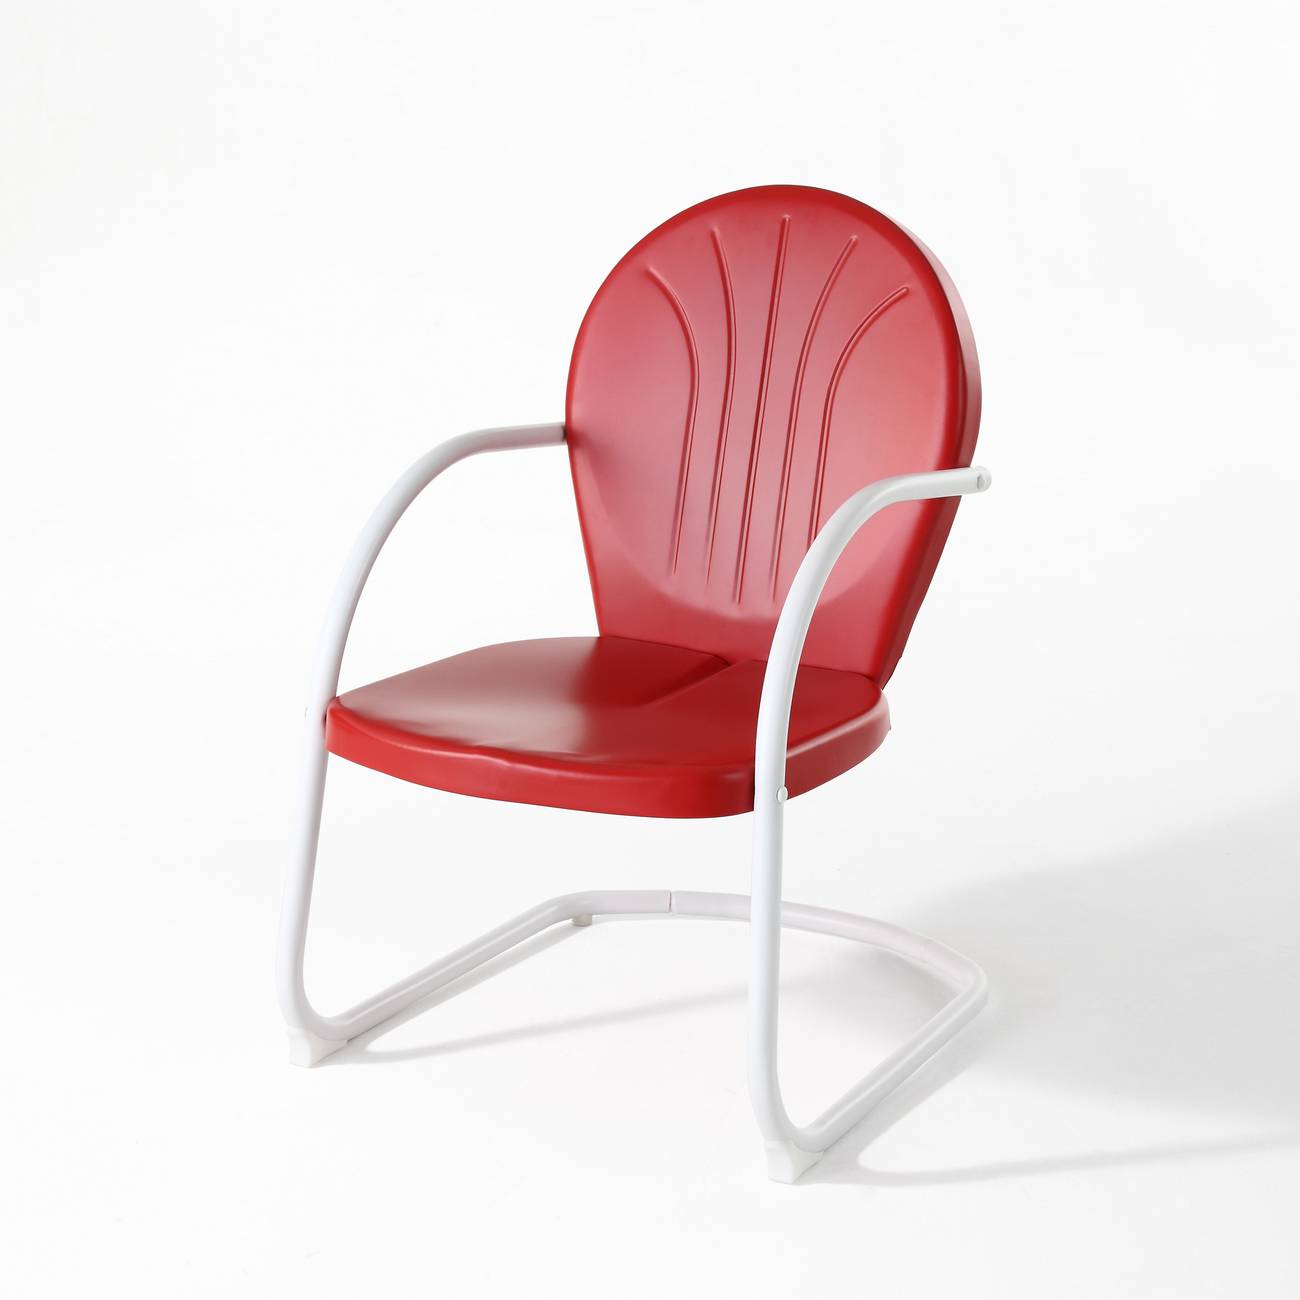 GRIFFITH METAL CHAIR IN RED FINISH